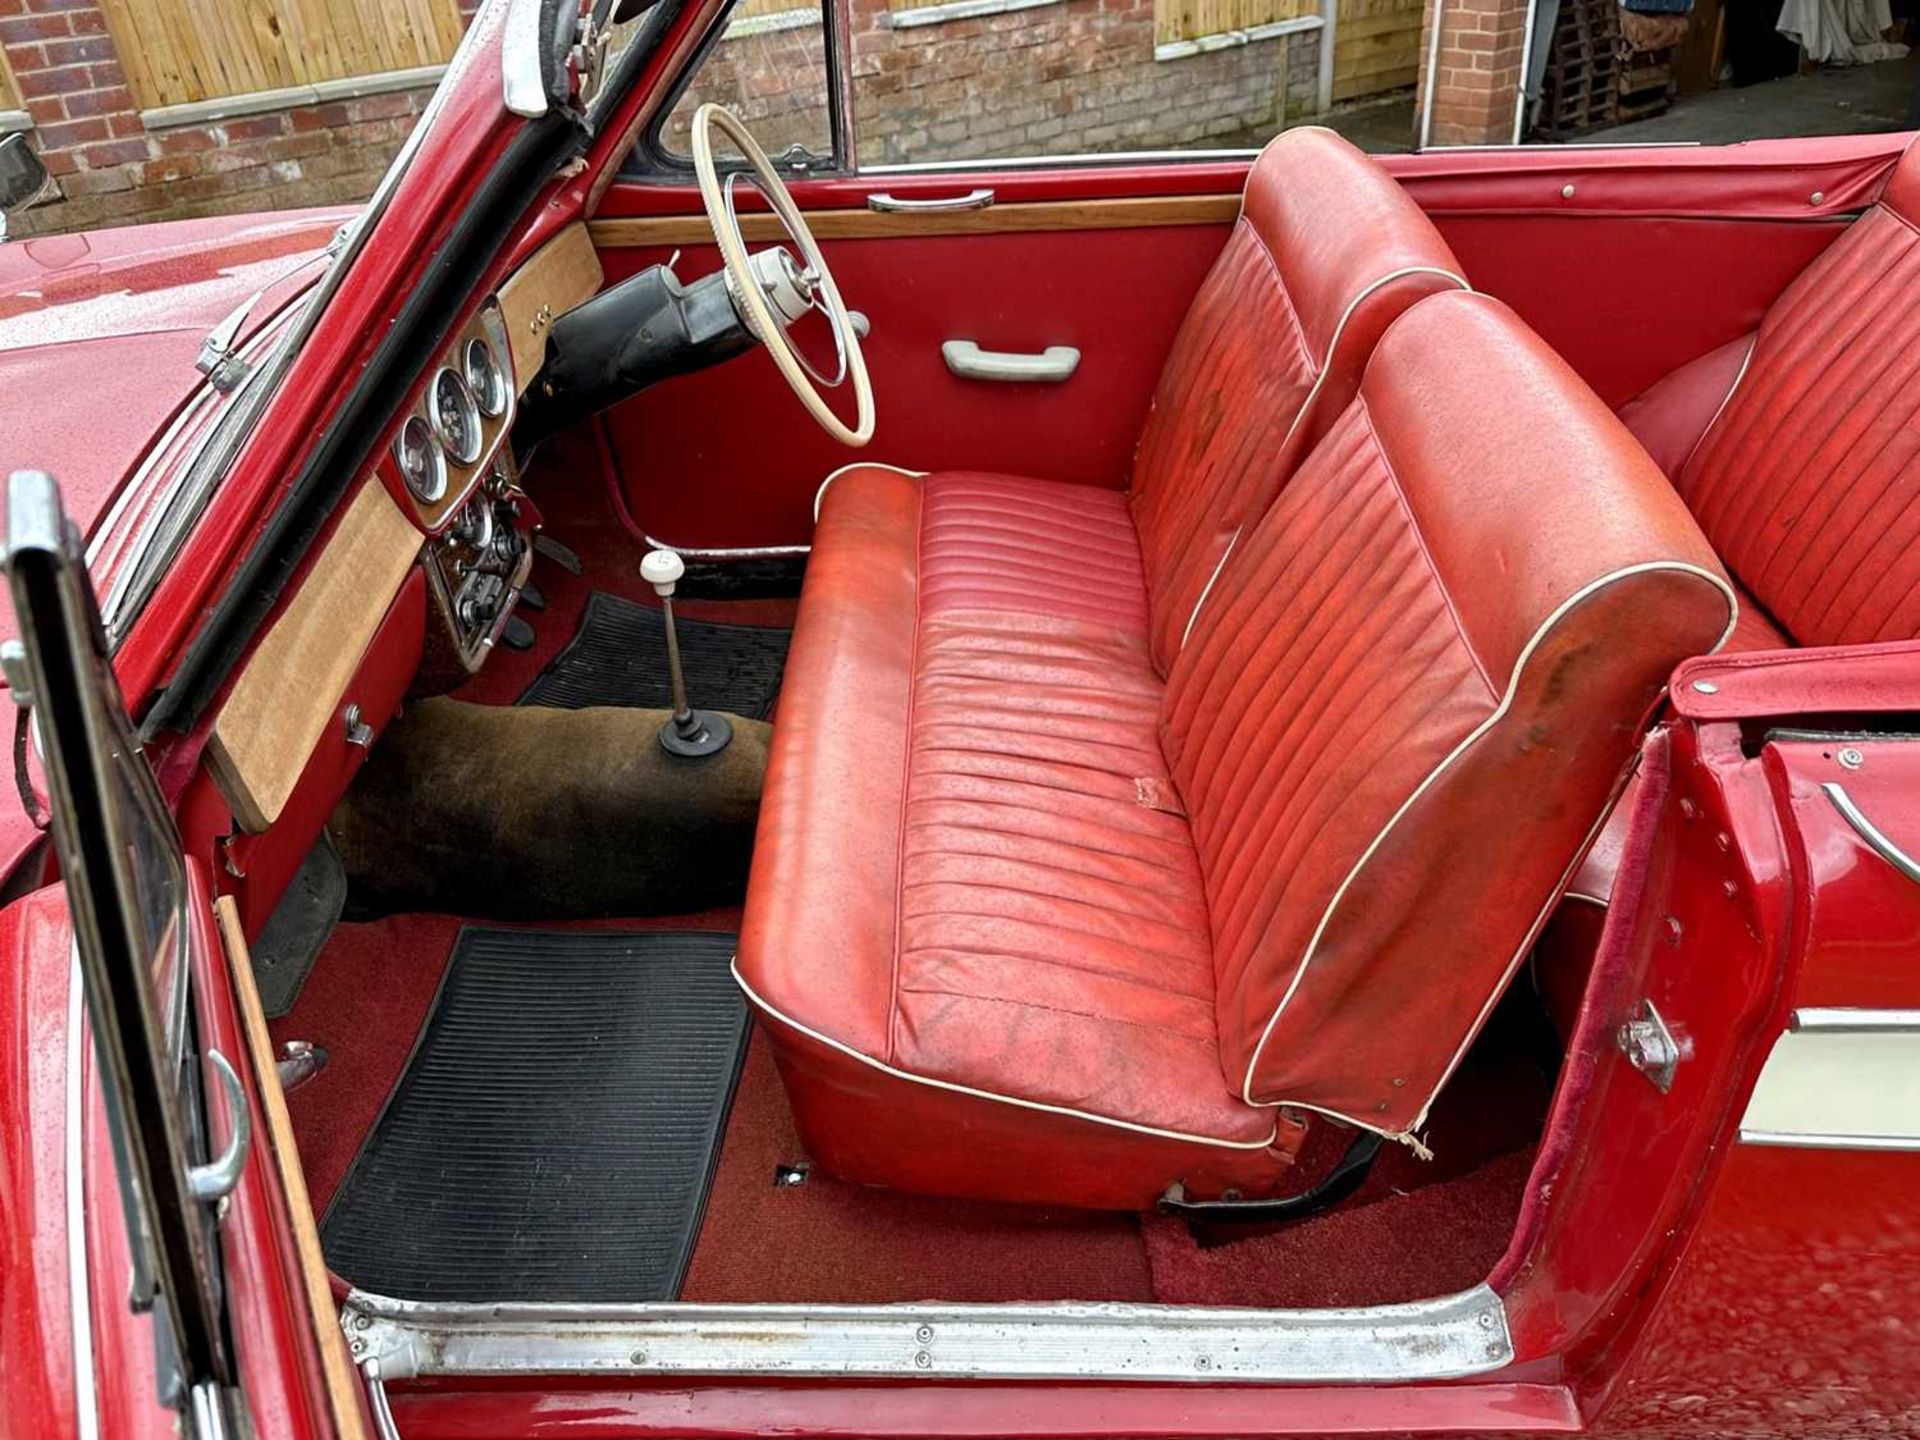 1961 Singer Gazelle Convertible Comes complete with overdrive, period radio and badge bar - Image 46 of 95